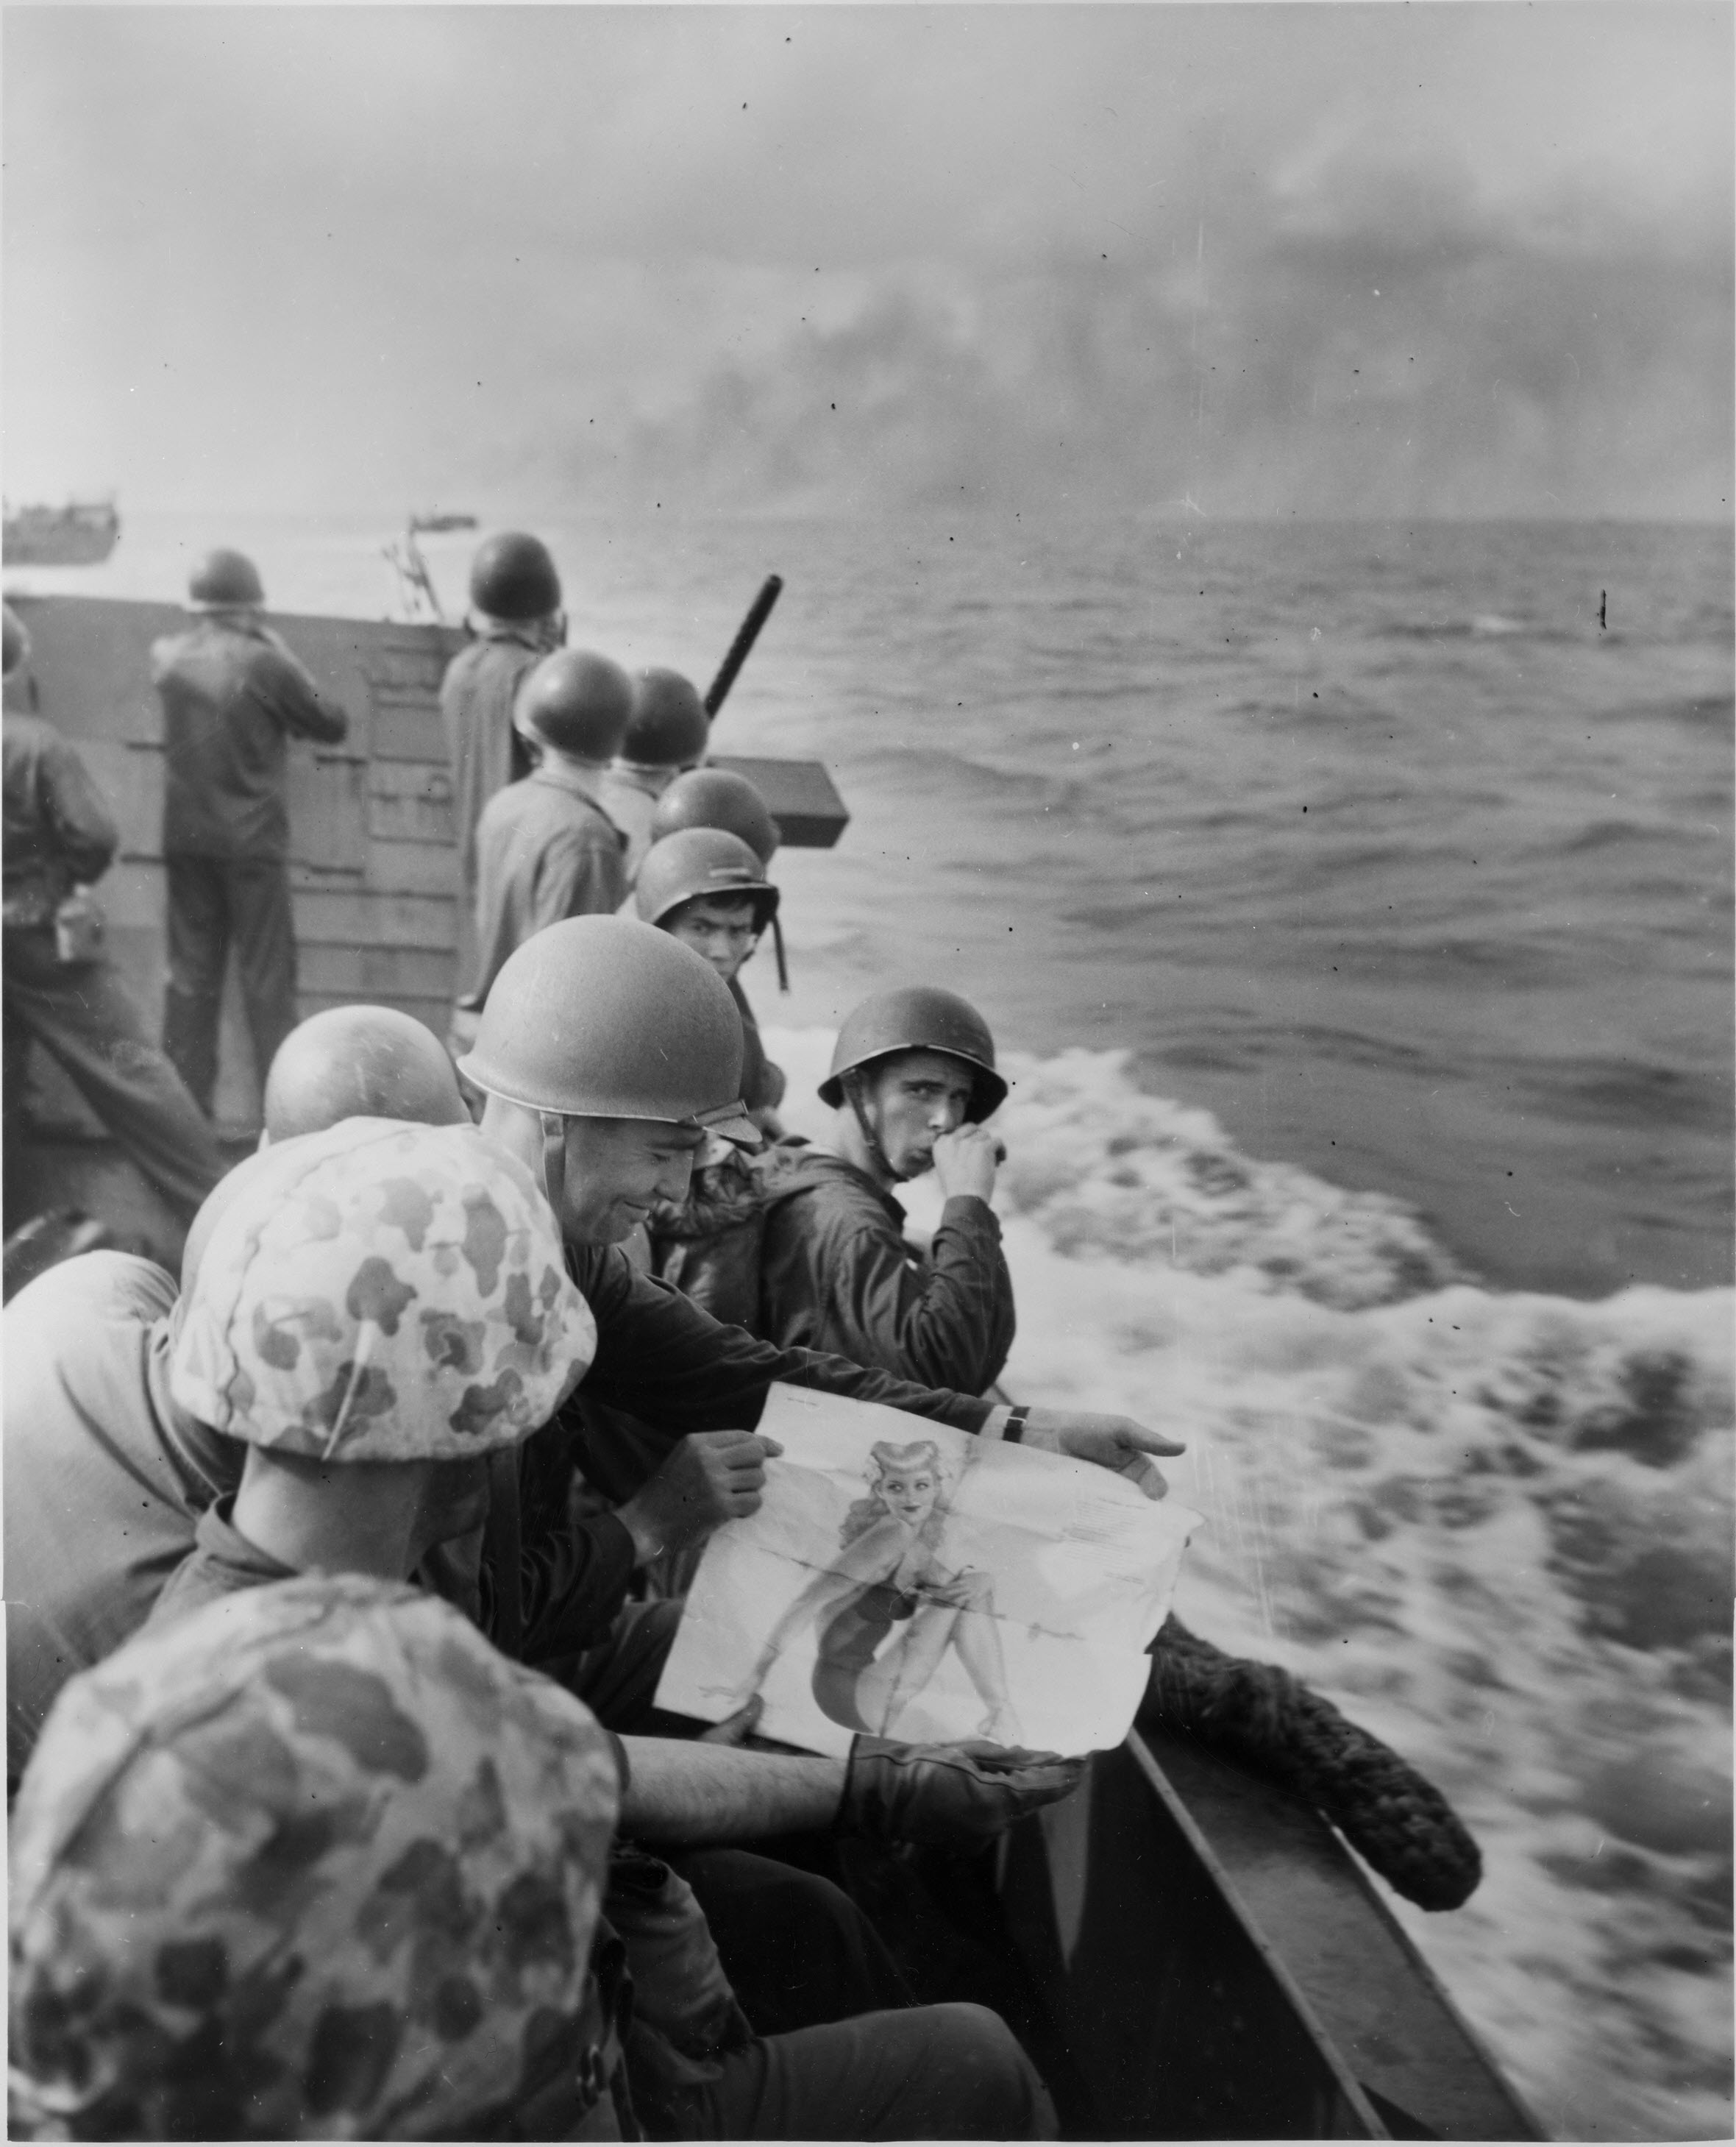 Marines on a landing barge approaching enemy-held island of Tarawa burning in the background, 1943.jpg